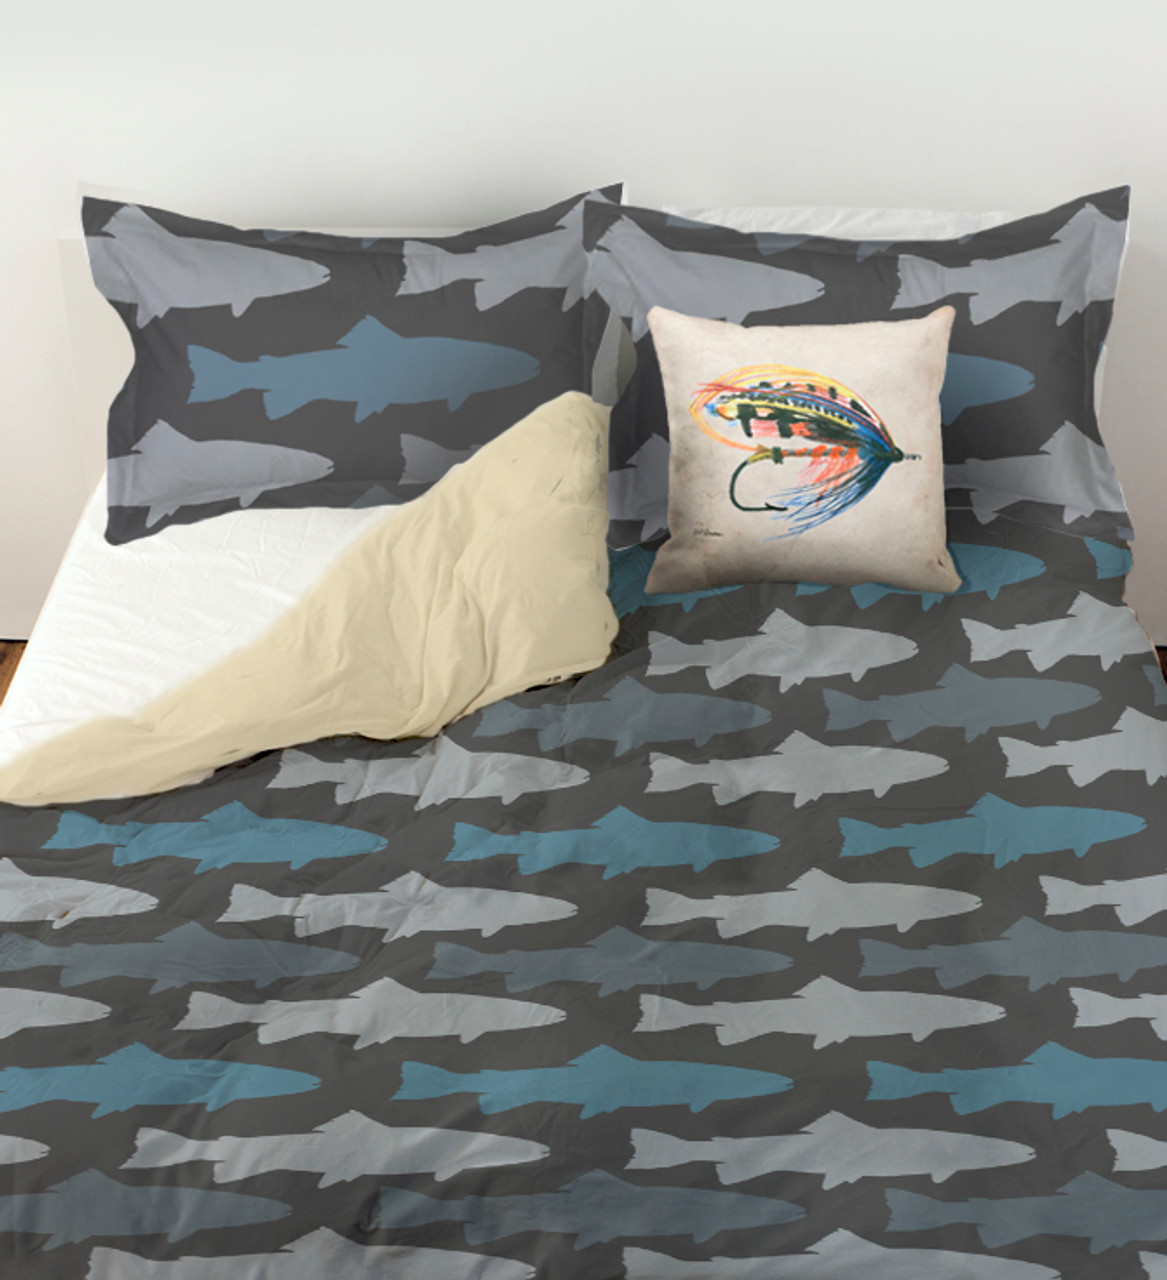 https://cdn11.bigcommerce.com/s-dthur0g/images/stencil/1280x1280/products/1165/4786/blue-trout-fly-fishing-duvet-cover-bed-set__13816.1465310853.jpg?c=2